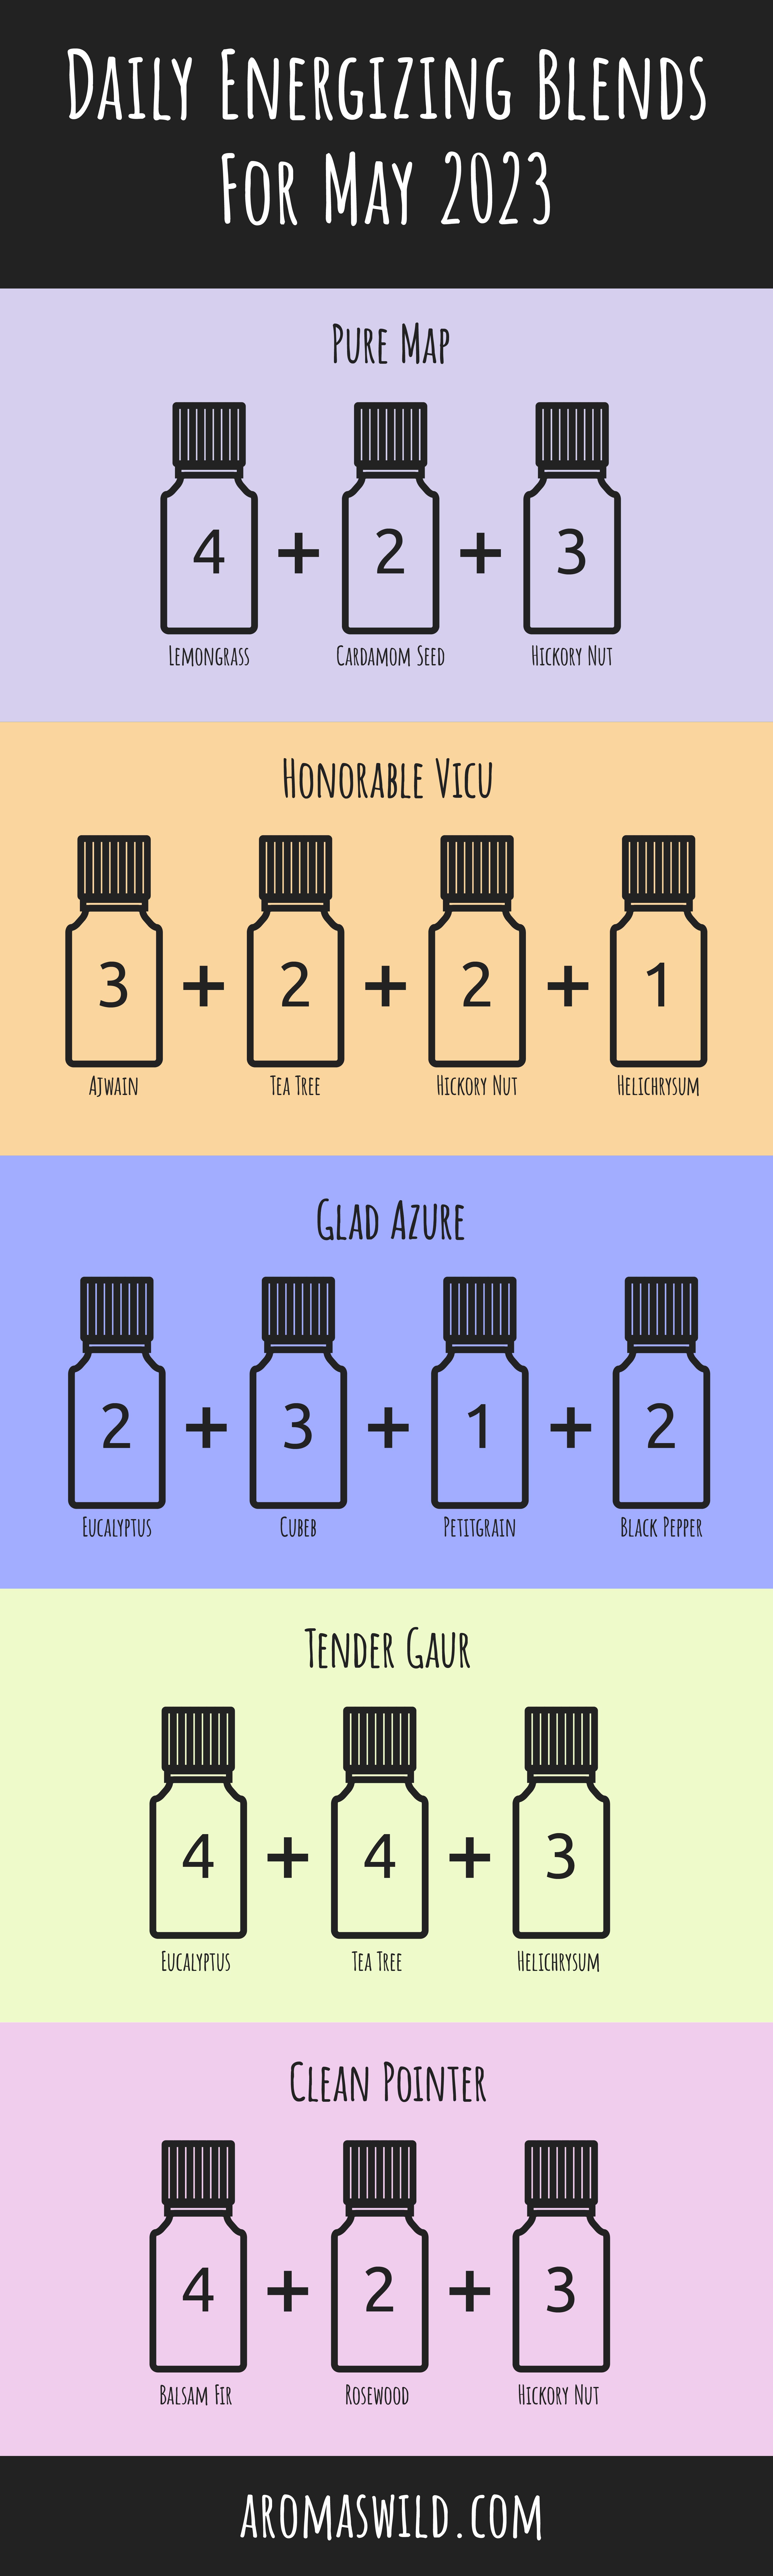 what essential oil is good for energy, five blends – Daily Energizing Blends For 6 May 2023